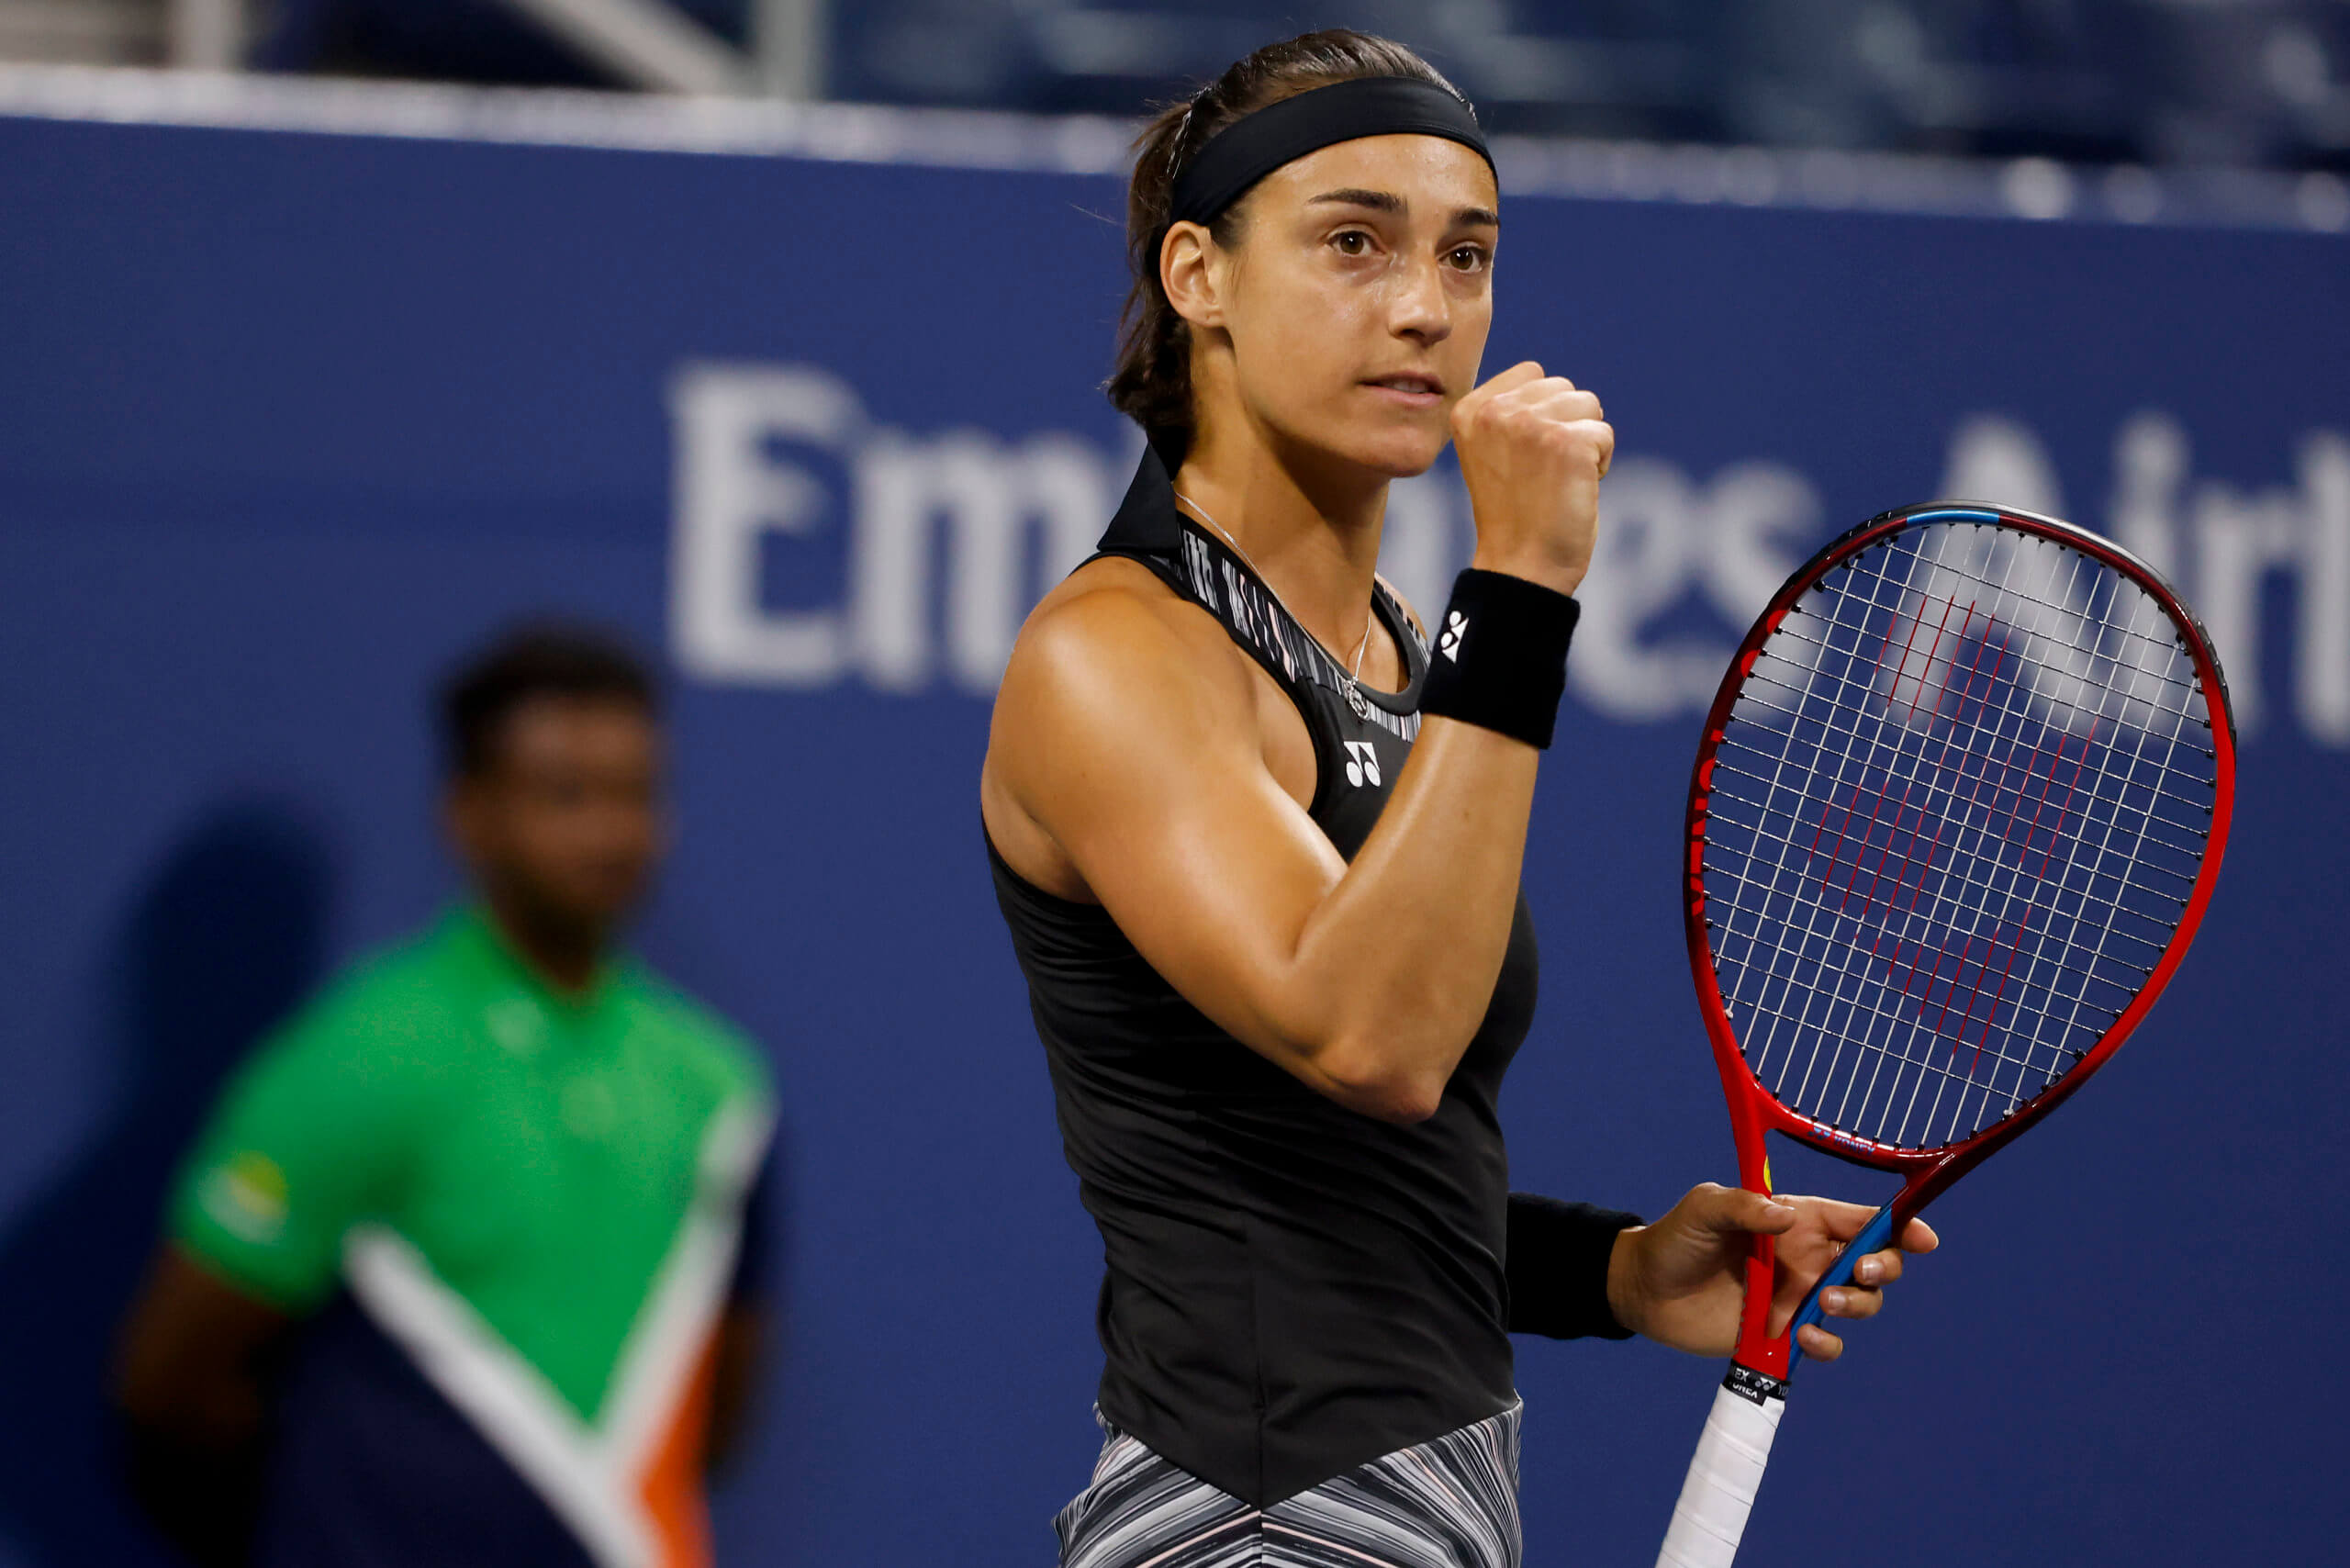 2022 US Open Thursday womens semi-finals schedule, best bets, picks, and more amNewYork